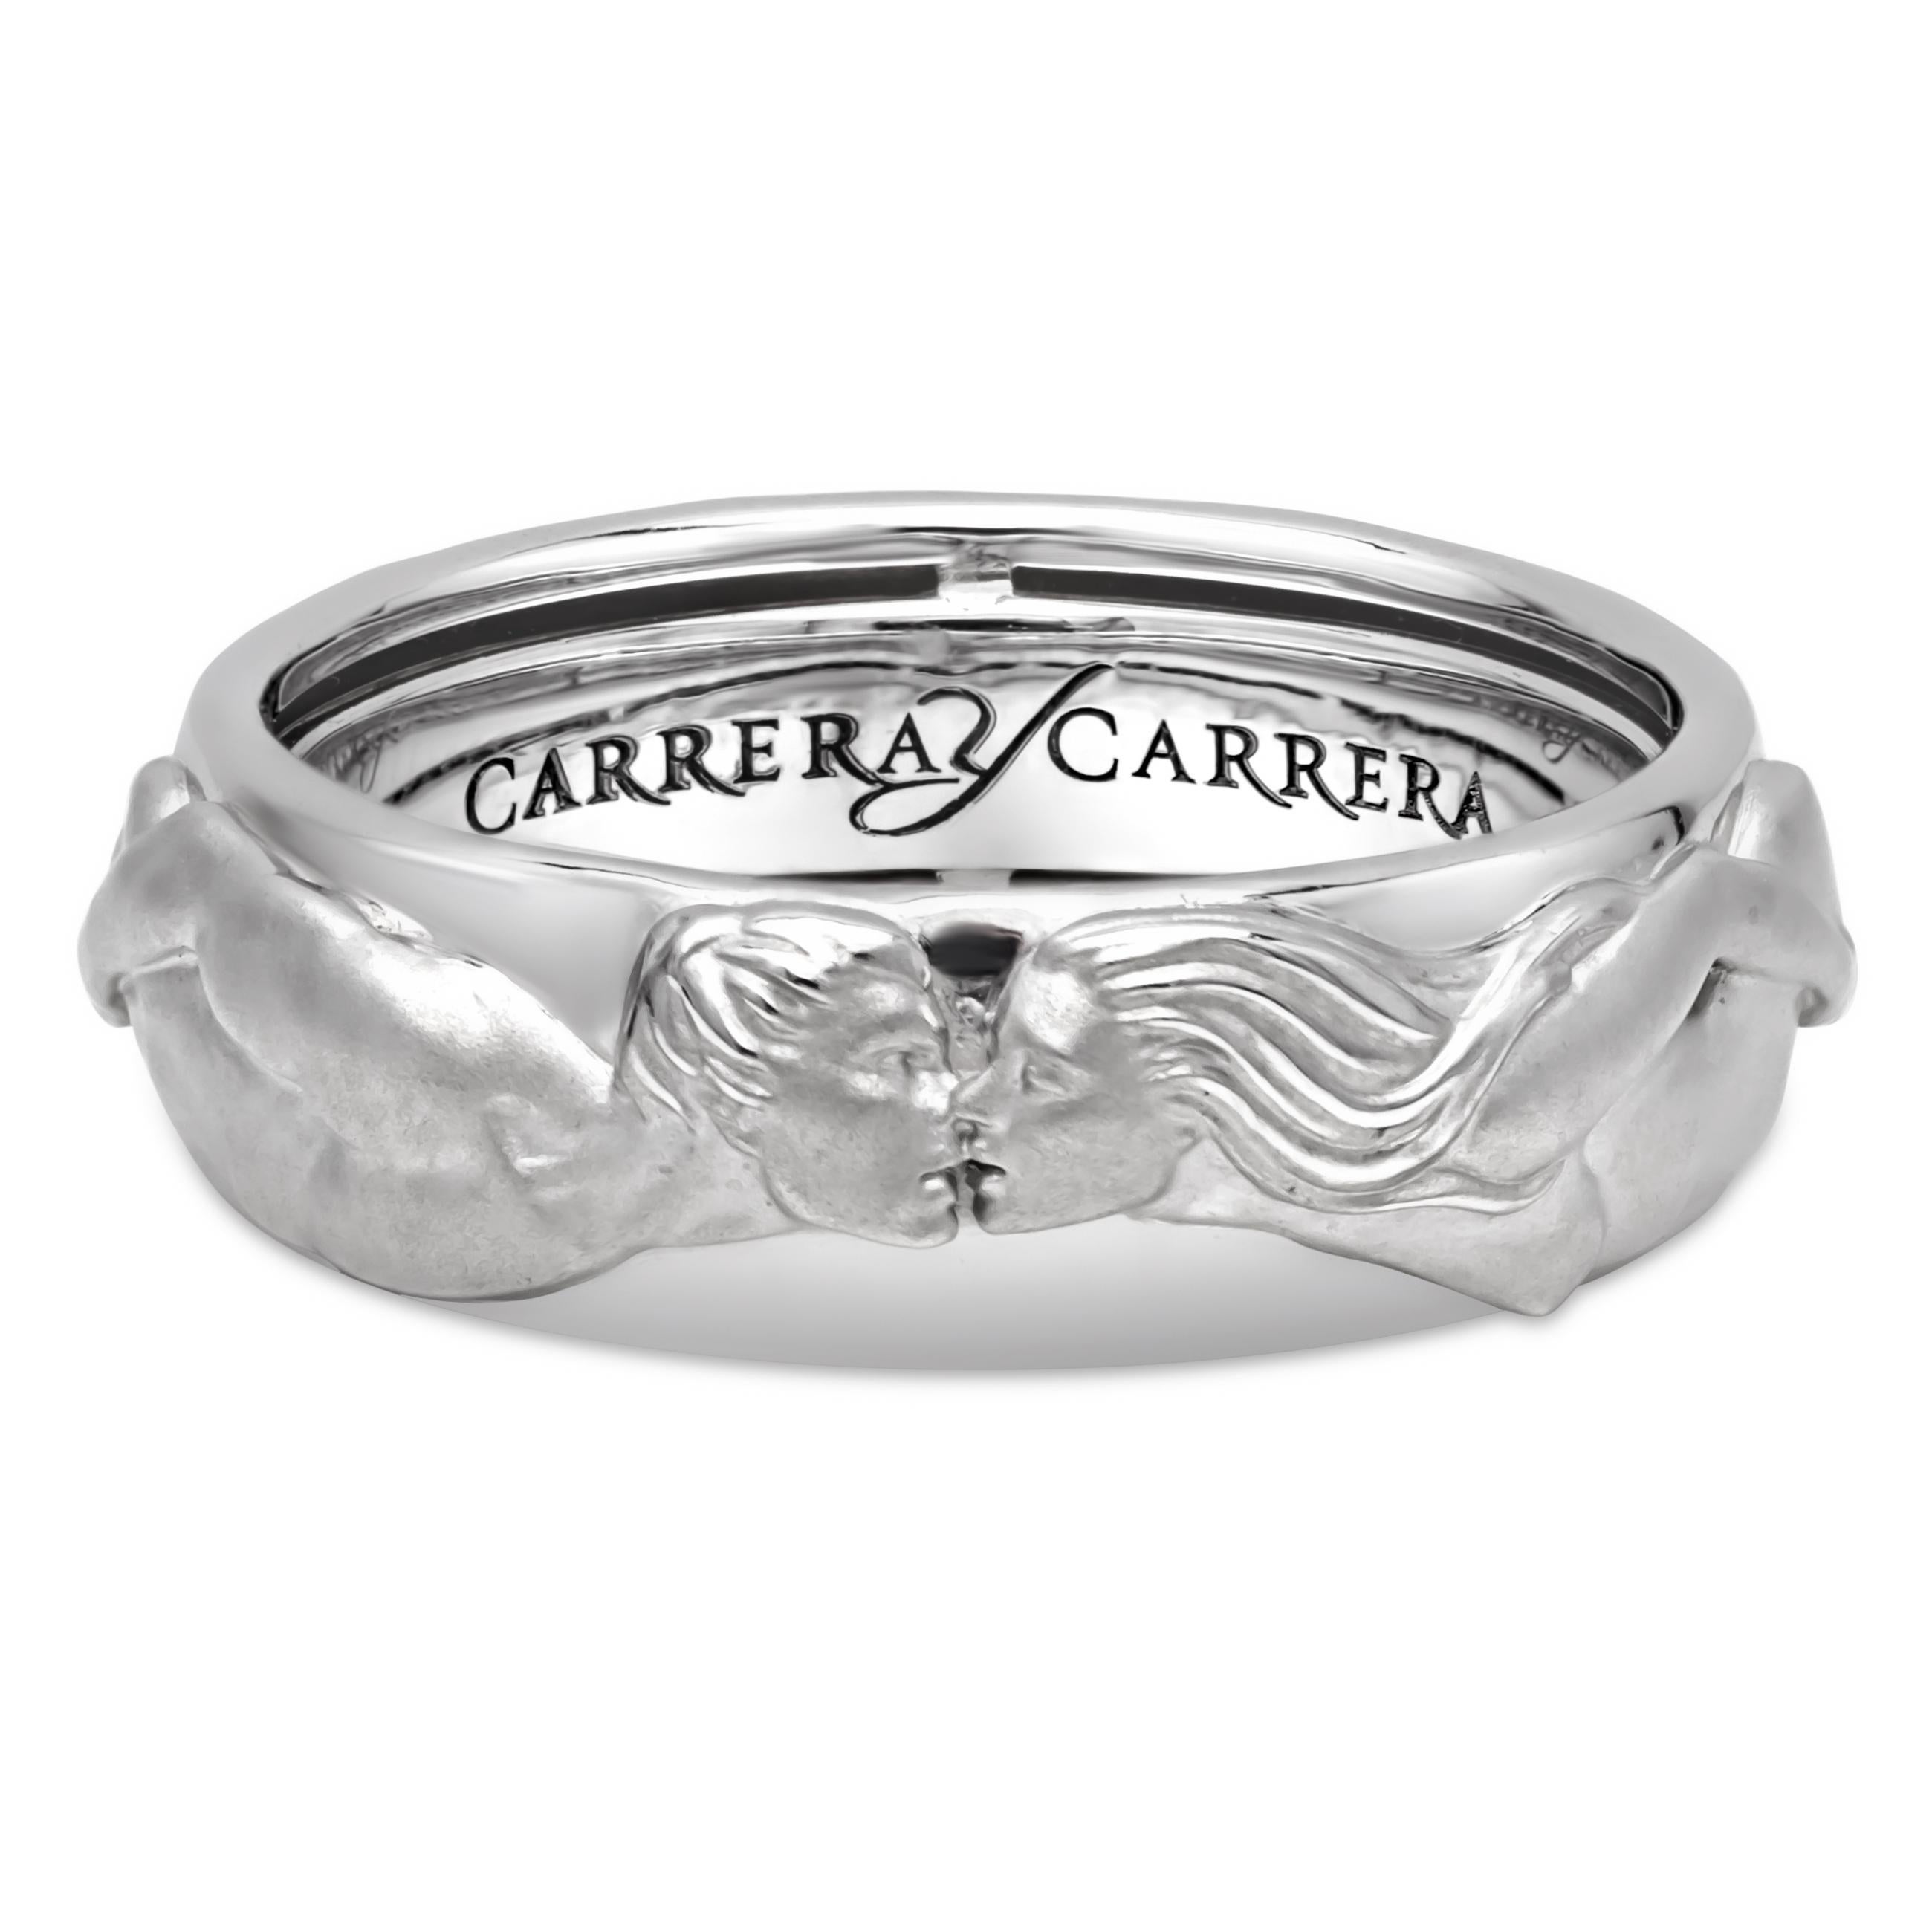 Signed by Carrera y Carrera, a designers present “Infinito”, a selection of wedding rings that, through their attention to detail and focus on their interior design, show that the true value of love lies in its inner beauty. El Beso wedding ring